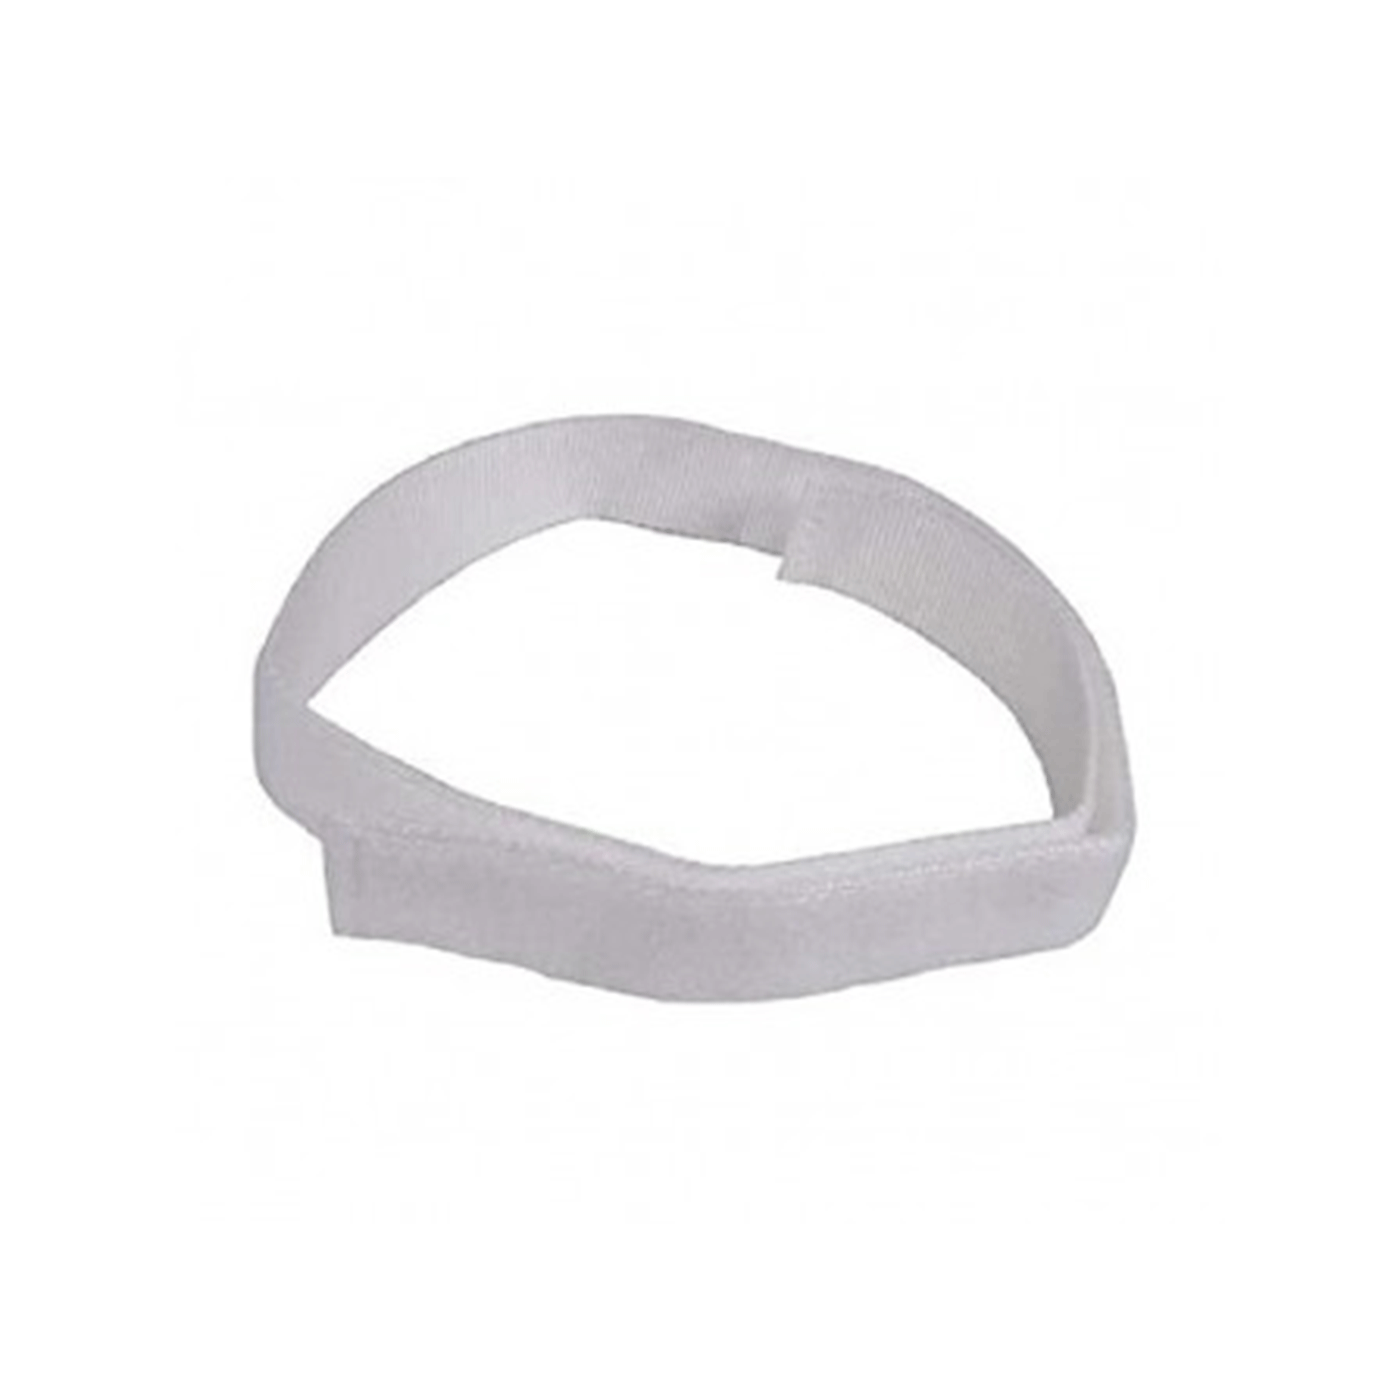 RADAR - TAPE UNDERBELT WITH VELCRO HOOK 40 MM WITHOUT BUCKLE